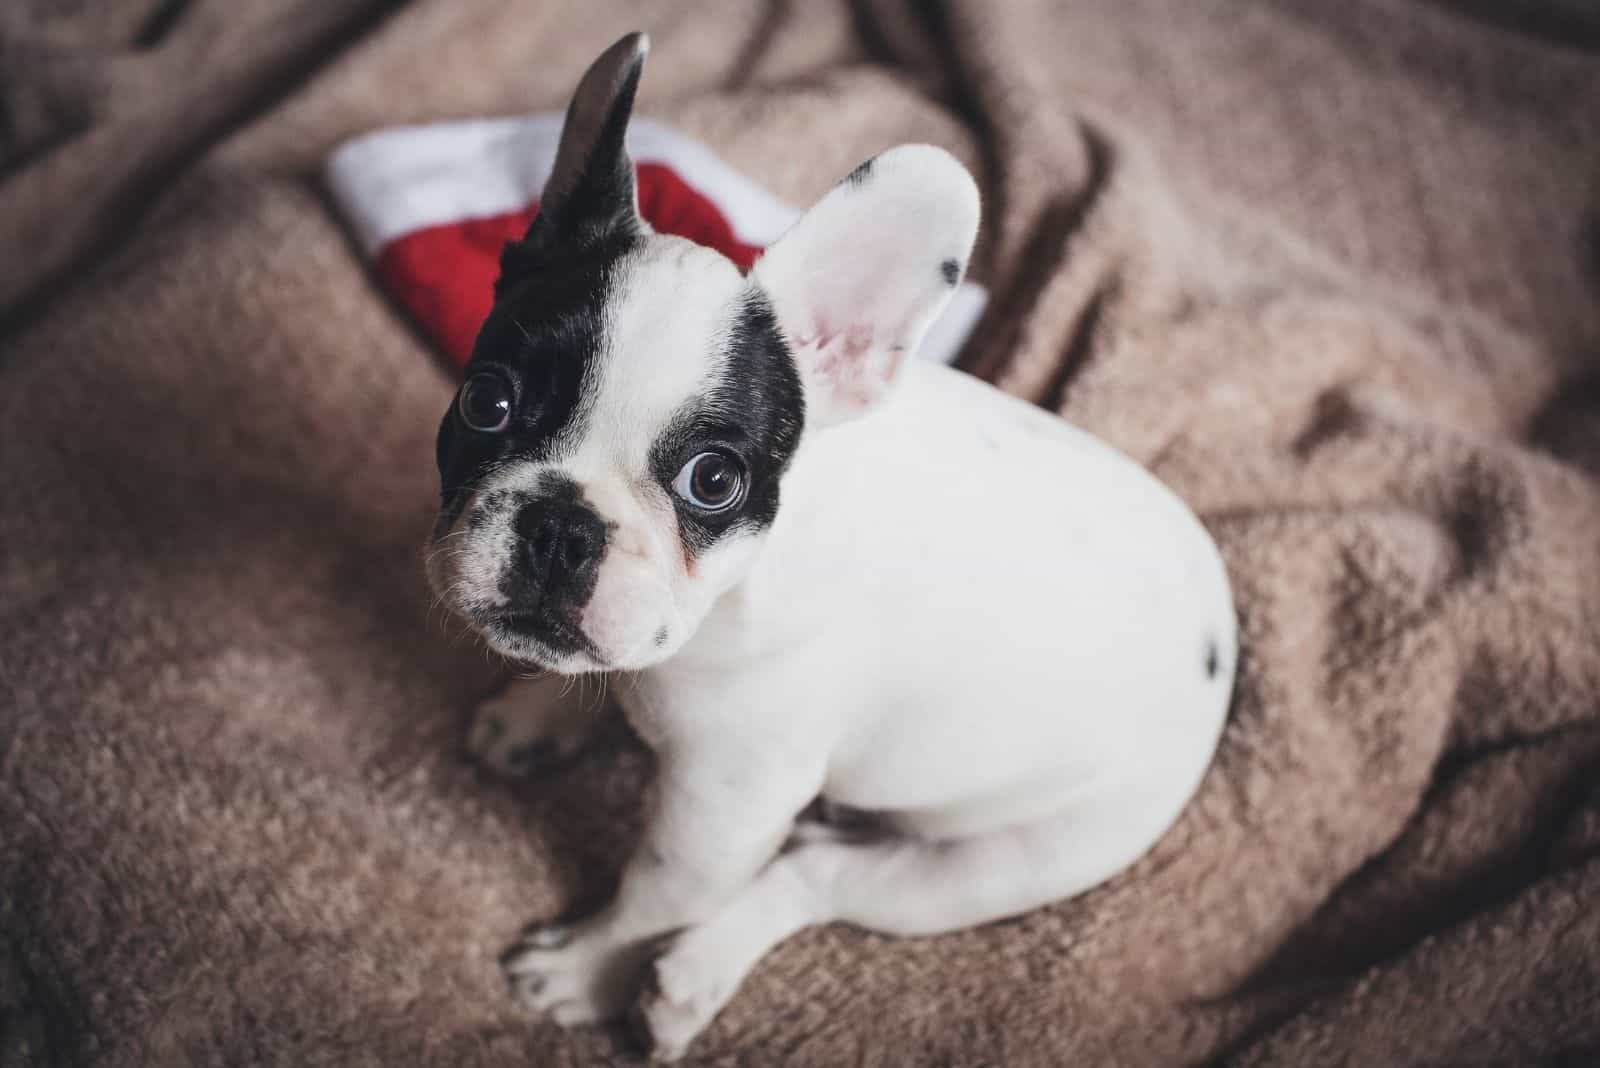 white and black french bulldog looking up at the camera while sitting on the tan colored cloth